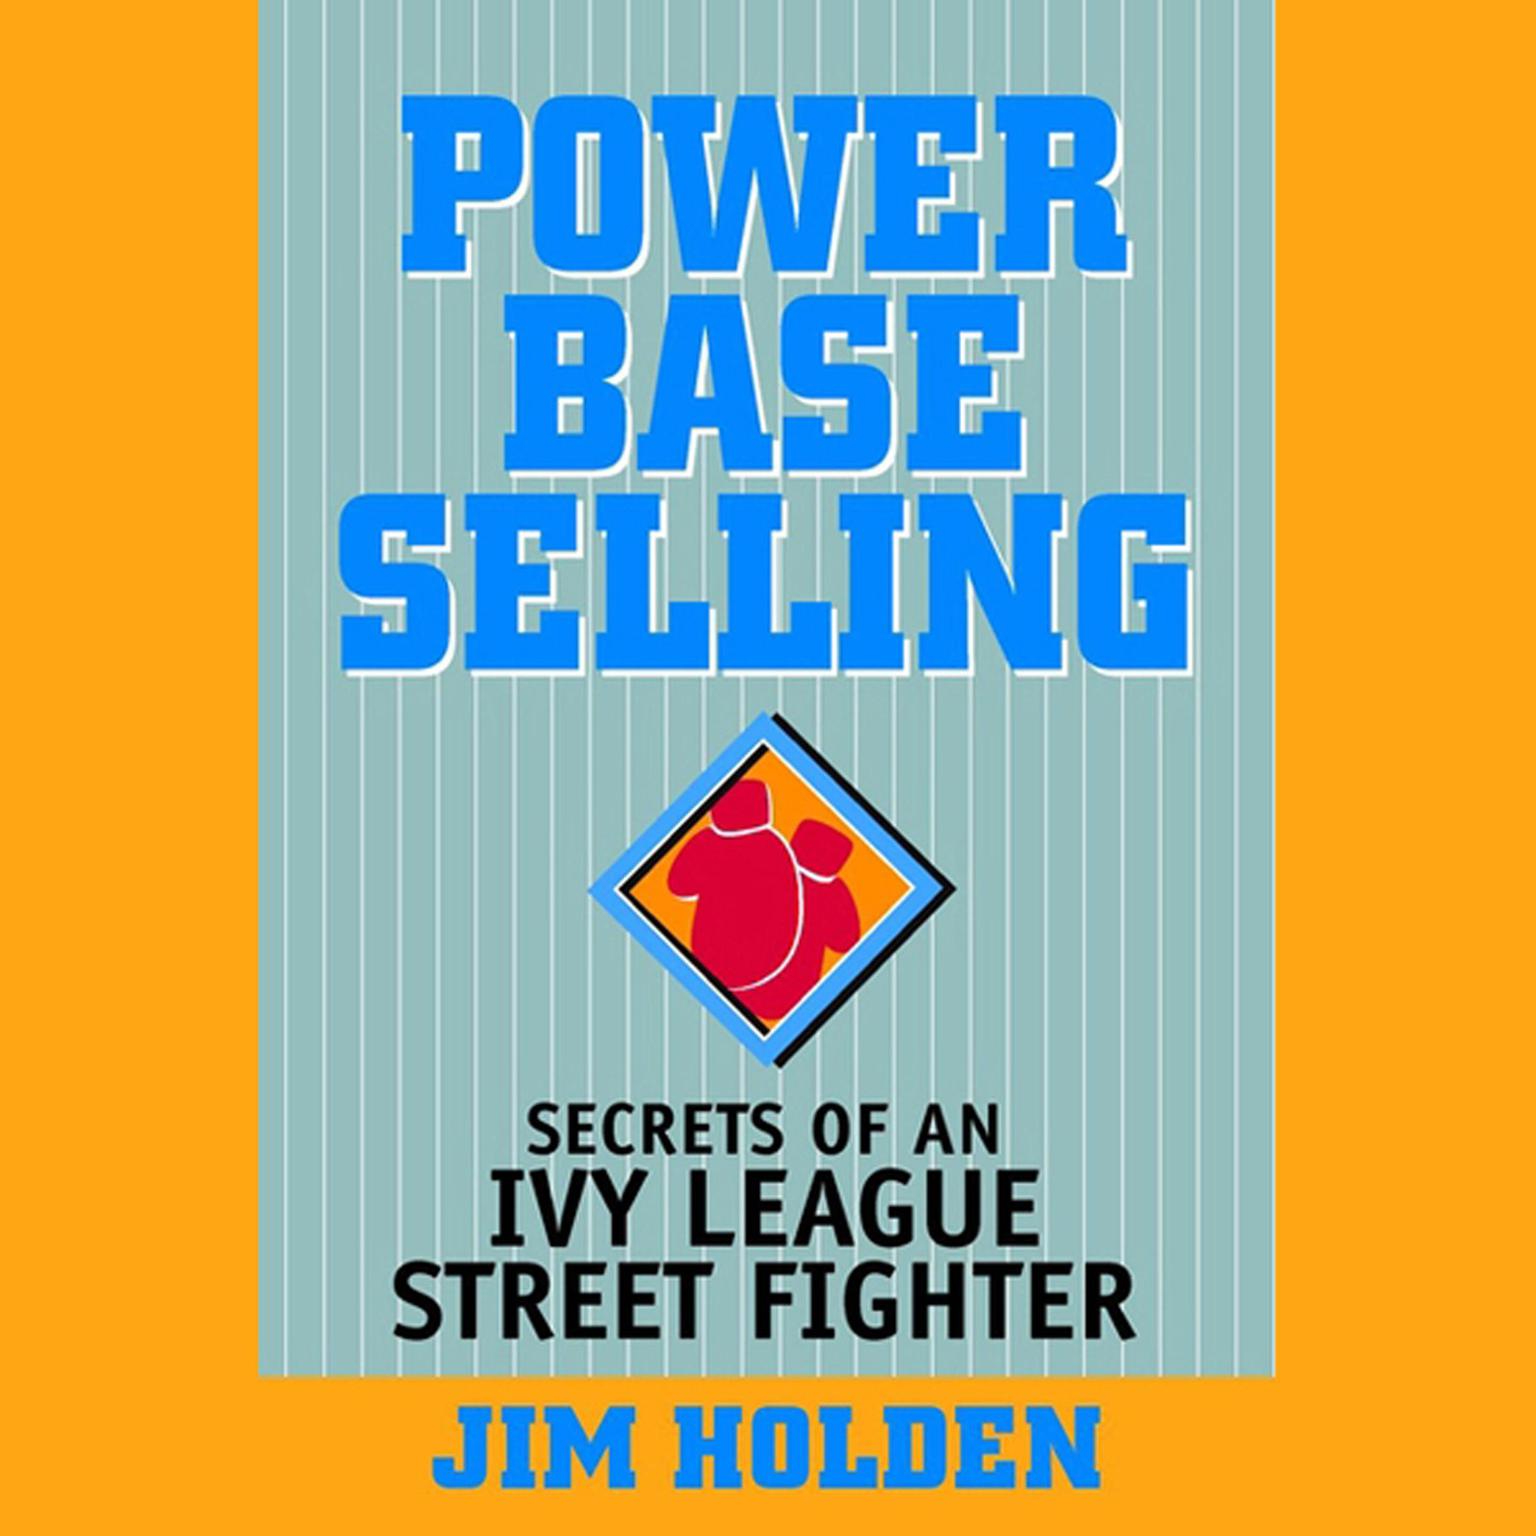 Power Base Selling: Secrets of an Ivy League Street Fighter  Audiobook, by Jim Holden